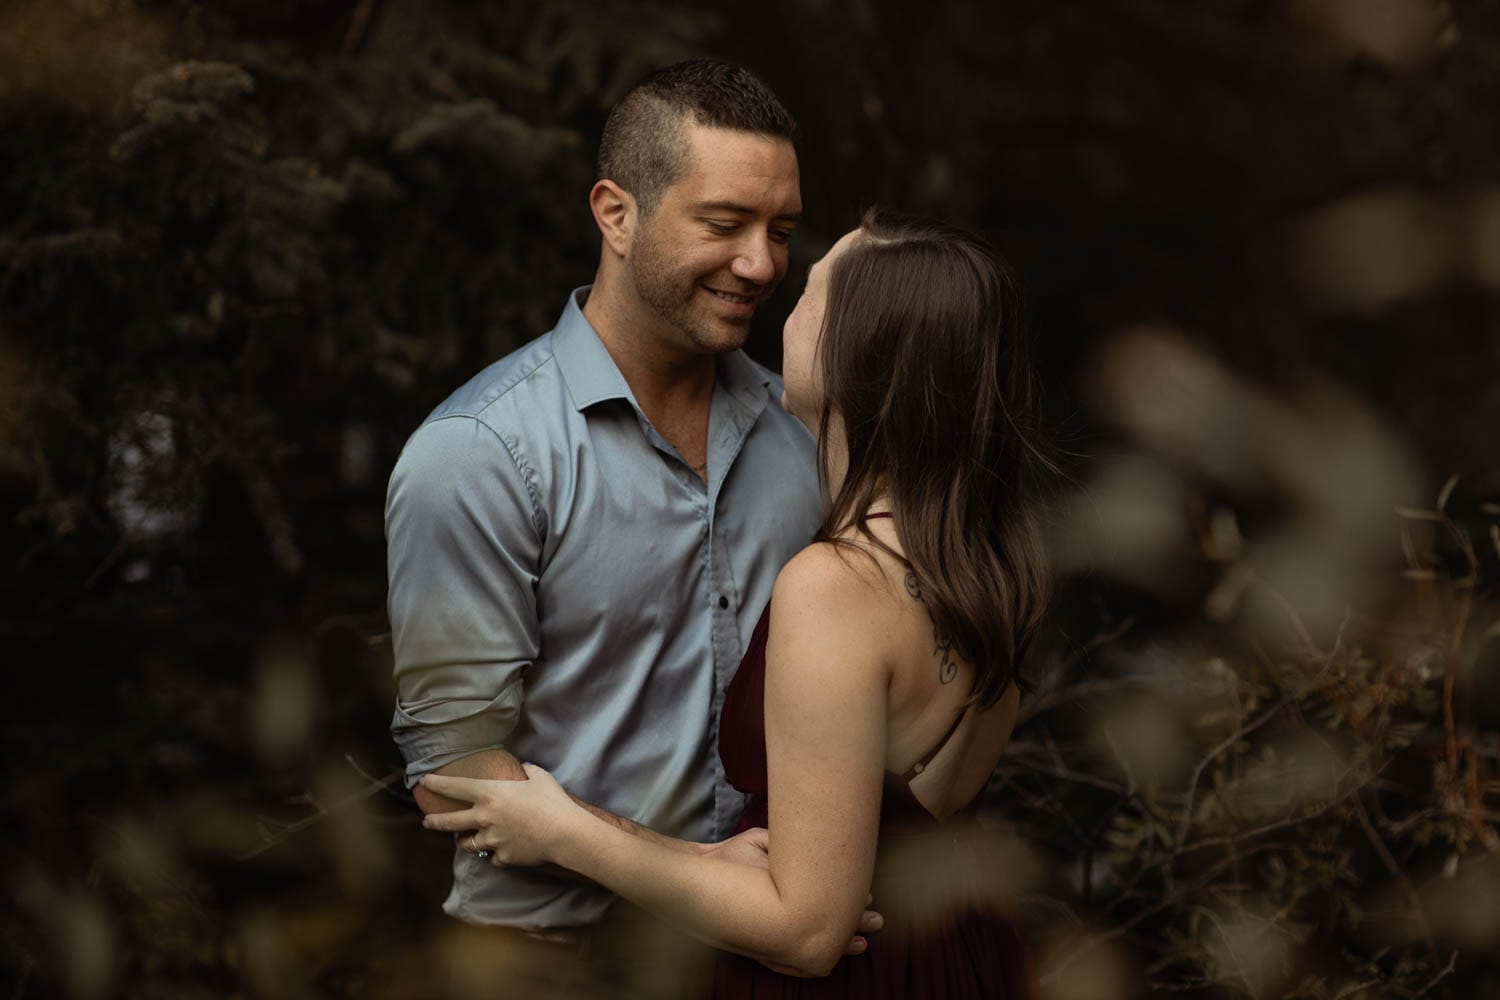 Couple portrait in forest